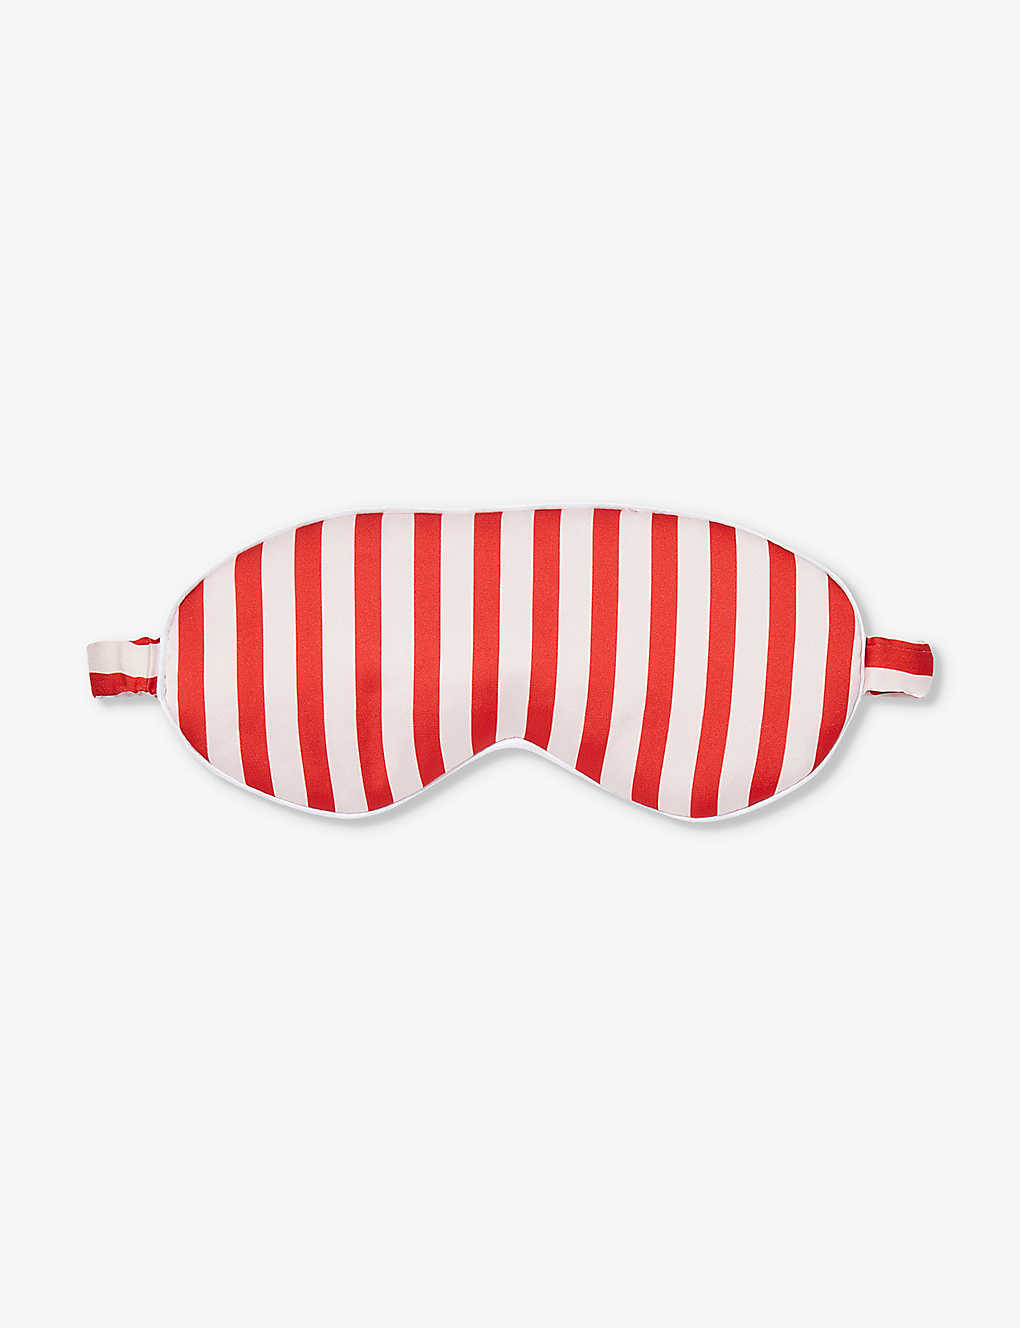 The Nap Co Womens Candy Striped Stretch-satin Sleep Mask